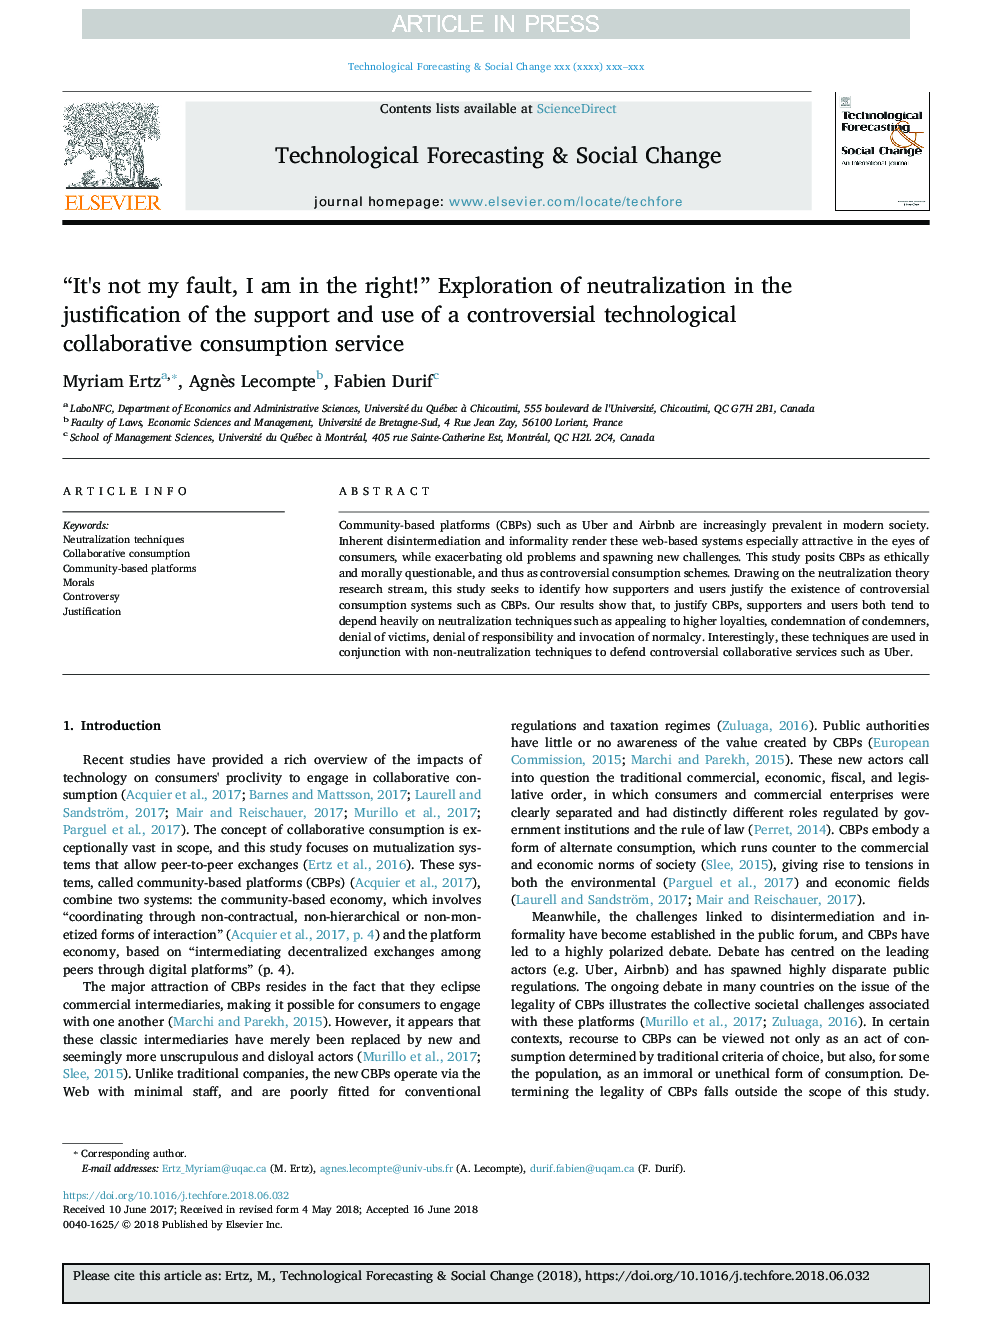 “It's not my fault, I am in the right!” Exploration of neutralization in the justification of the support and use of a controversial technological collaborative consumption service